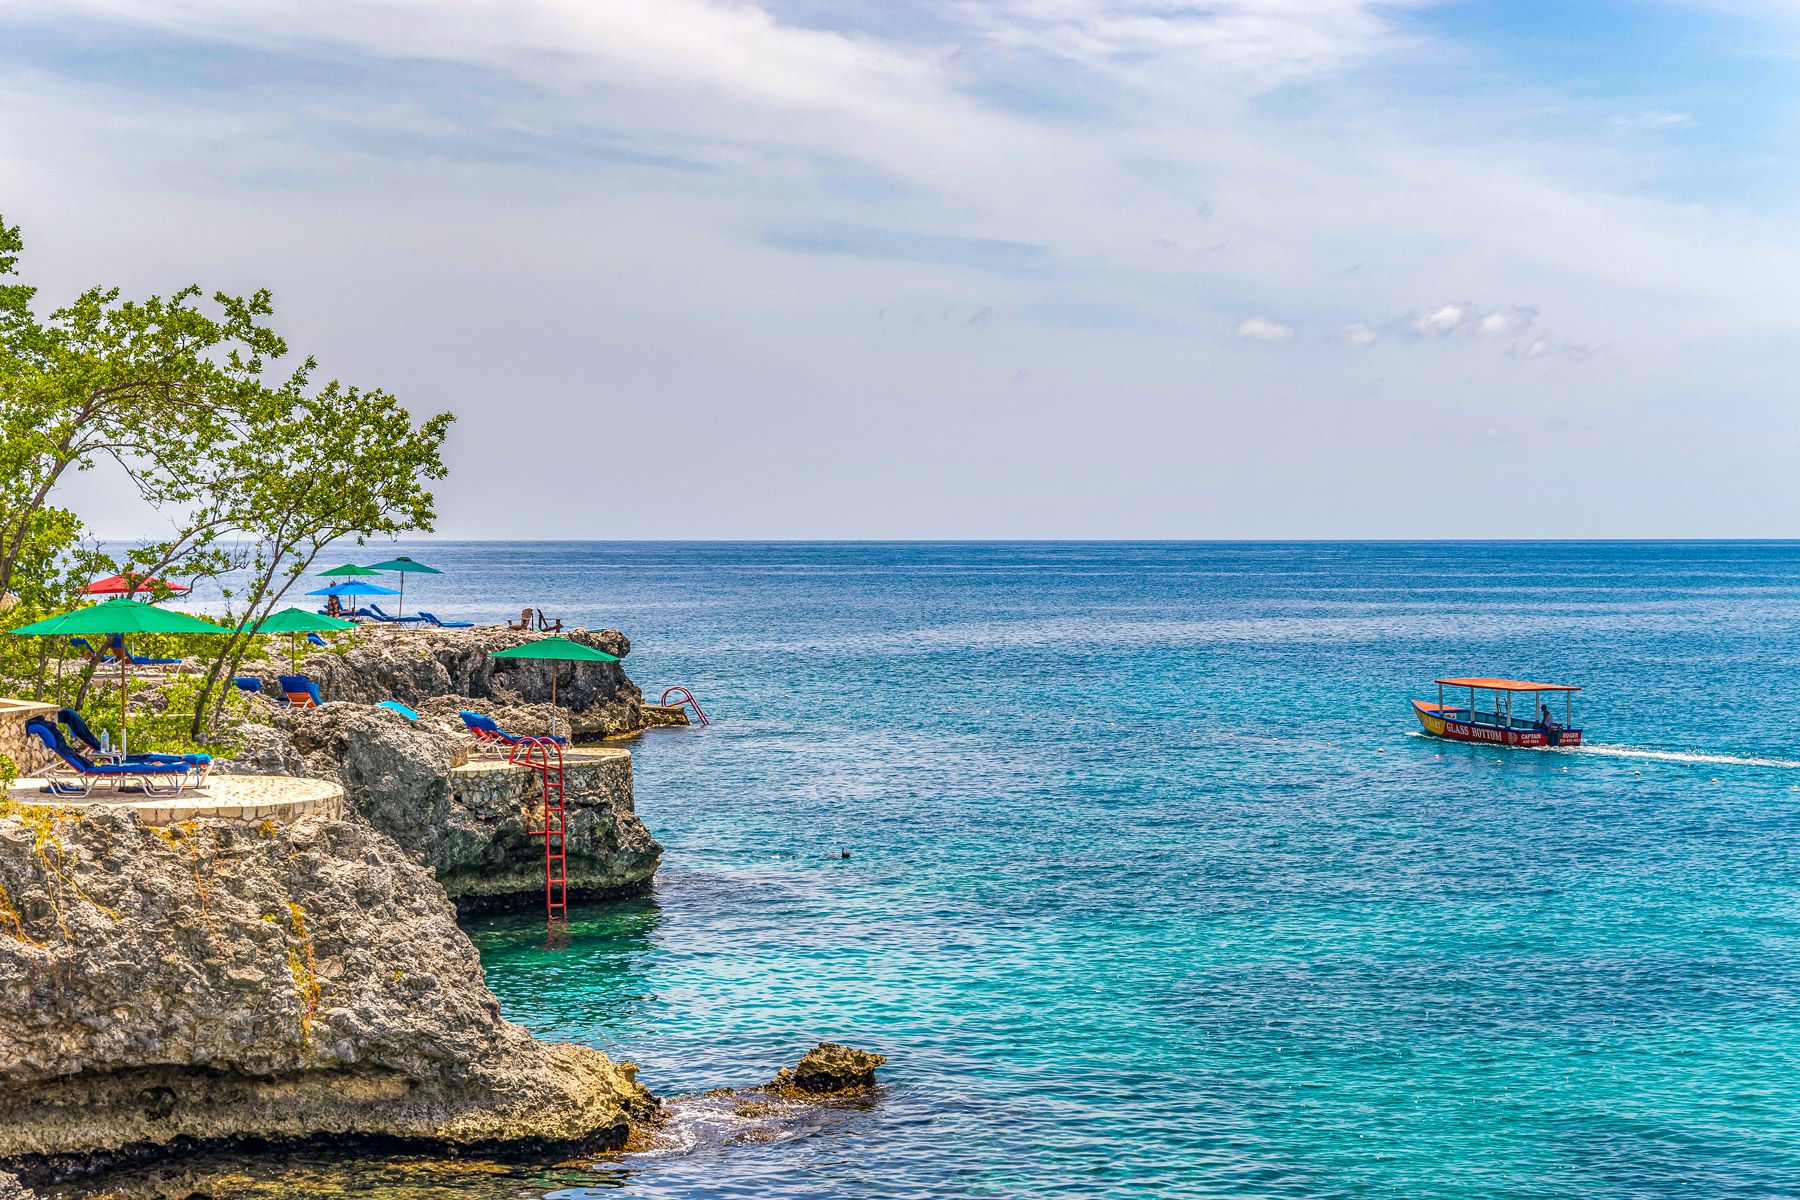 Get Your Fill Of Authentic Jamaican Flavors At These Negril Restaurants